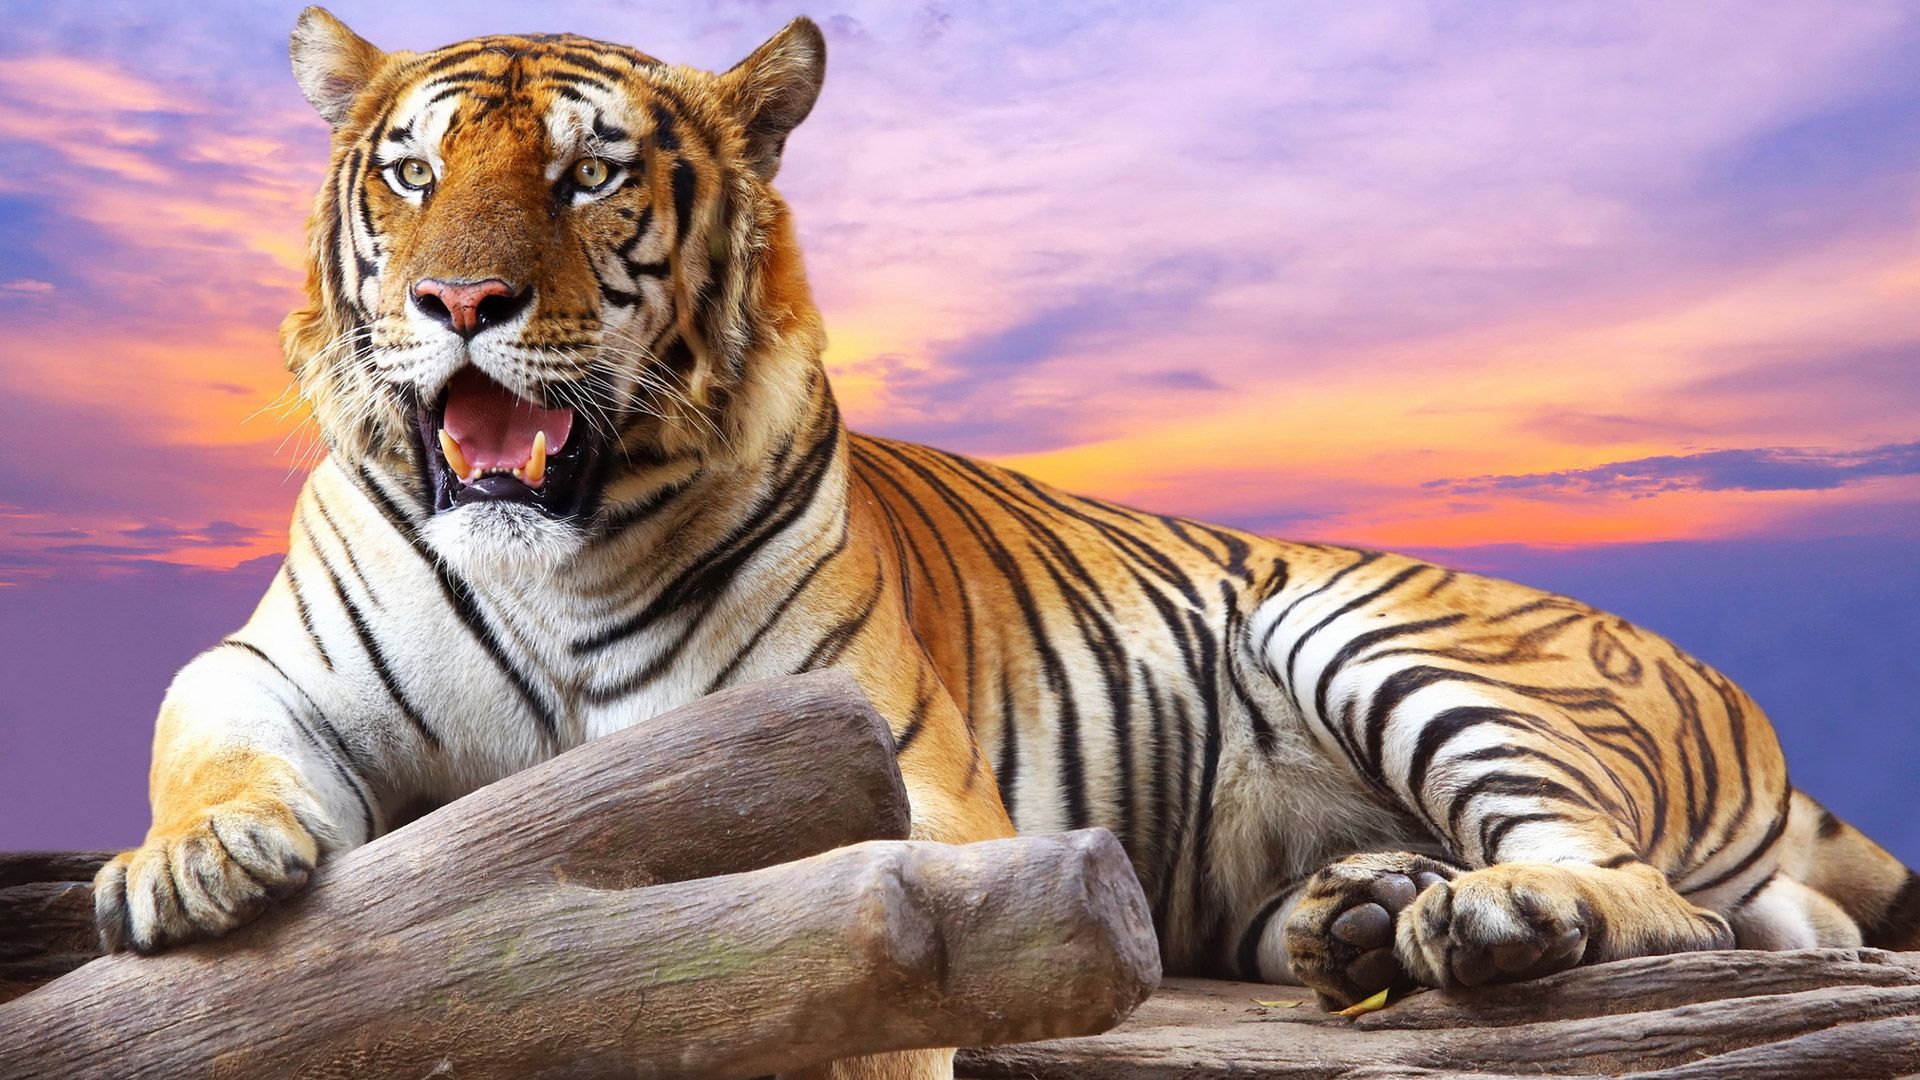 Wild Tiger in mood wallpapers Free full hd wallpapers for 1080p